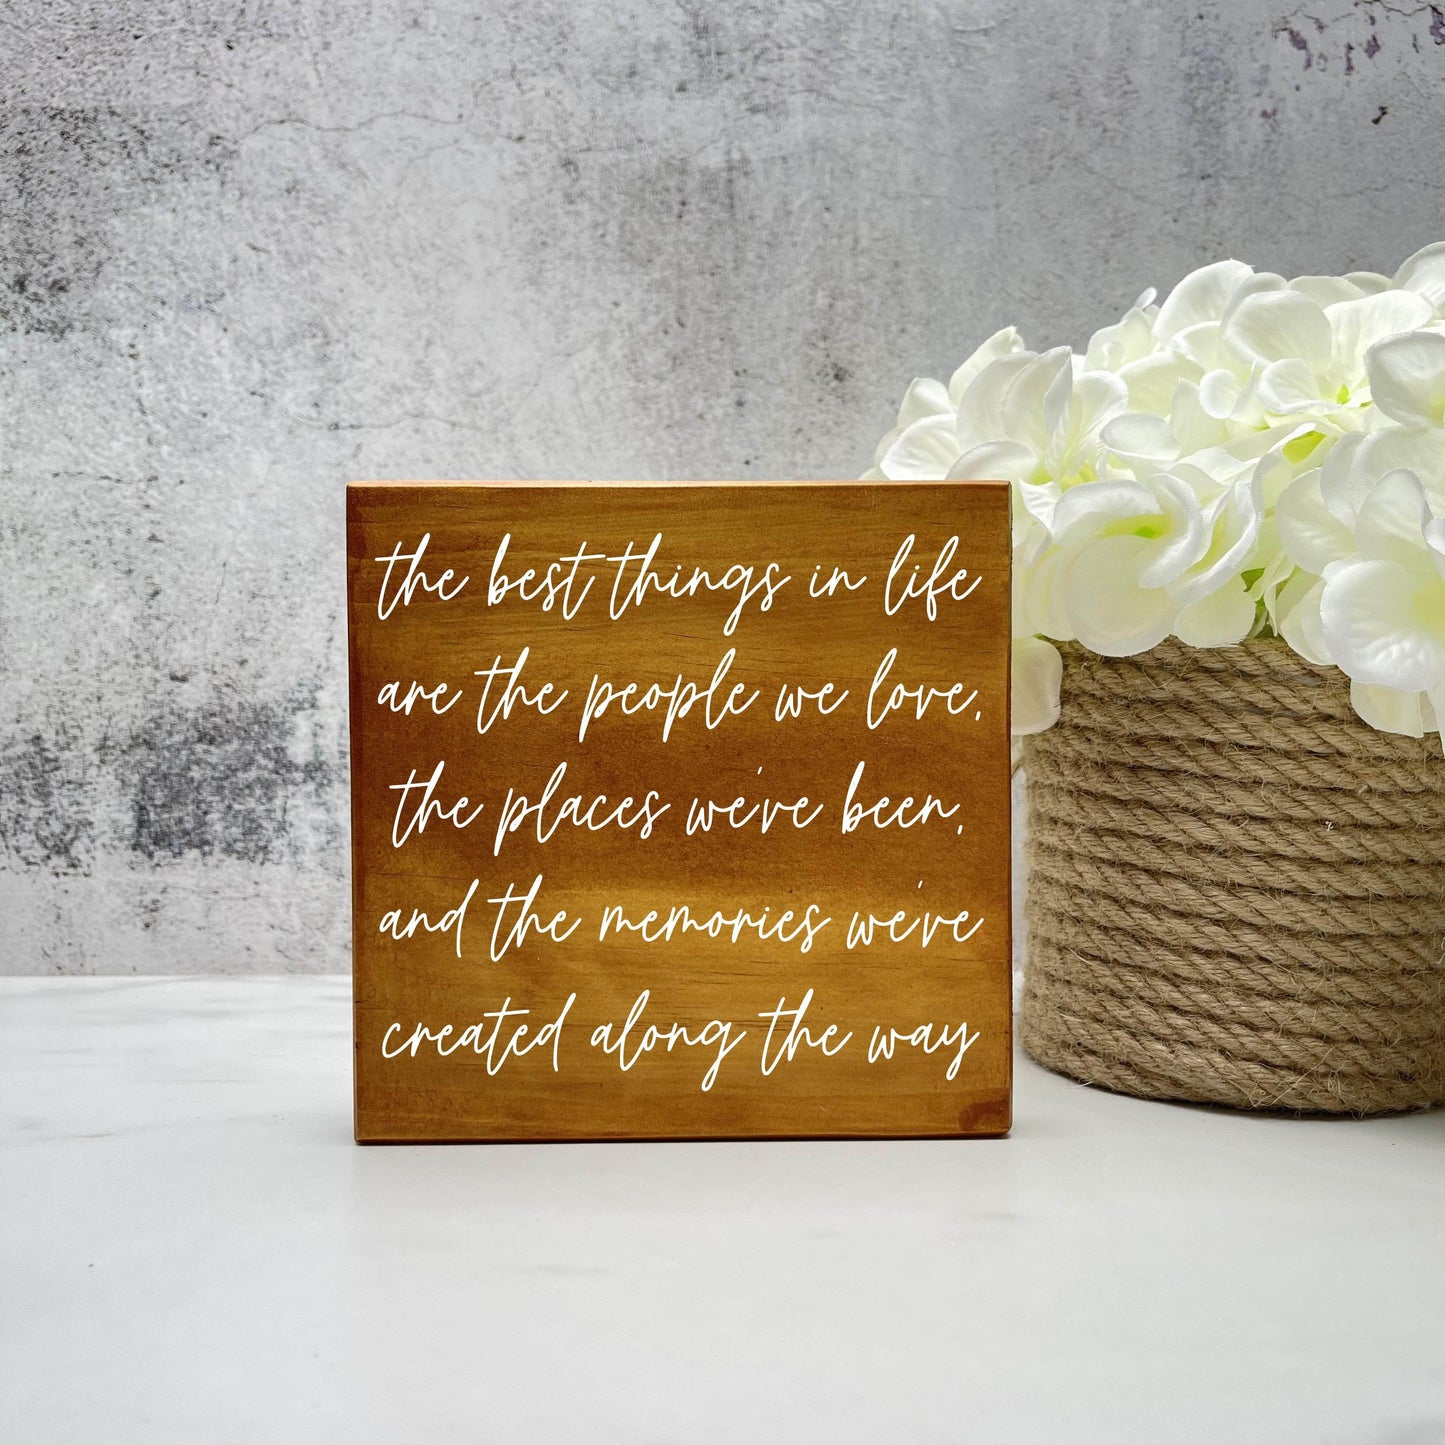 The best things in life wood sign, farmhouse sign, rustic decor, home decor